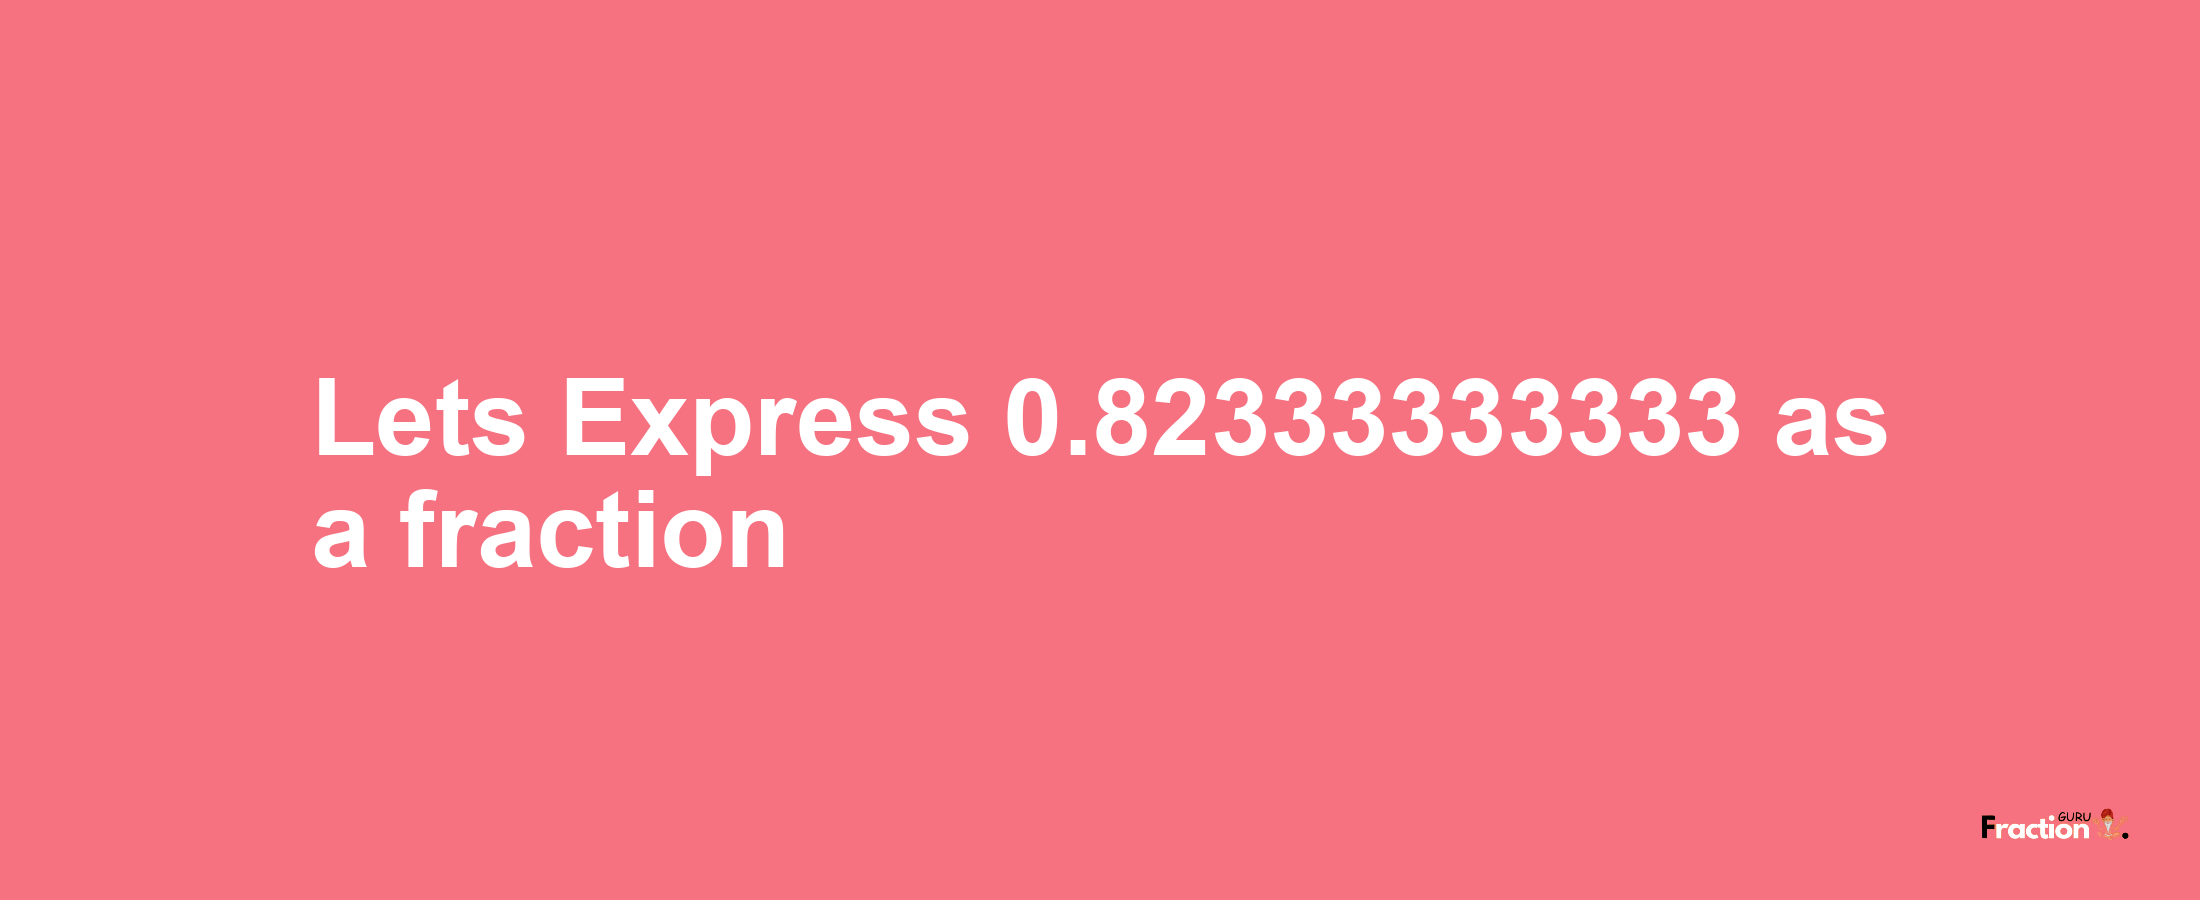 Lets Express 0.82333333333 as afraction